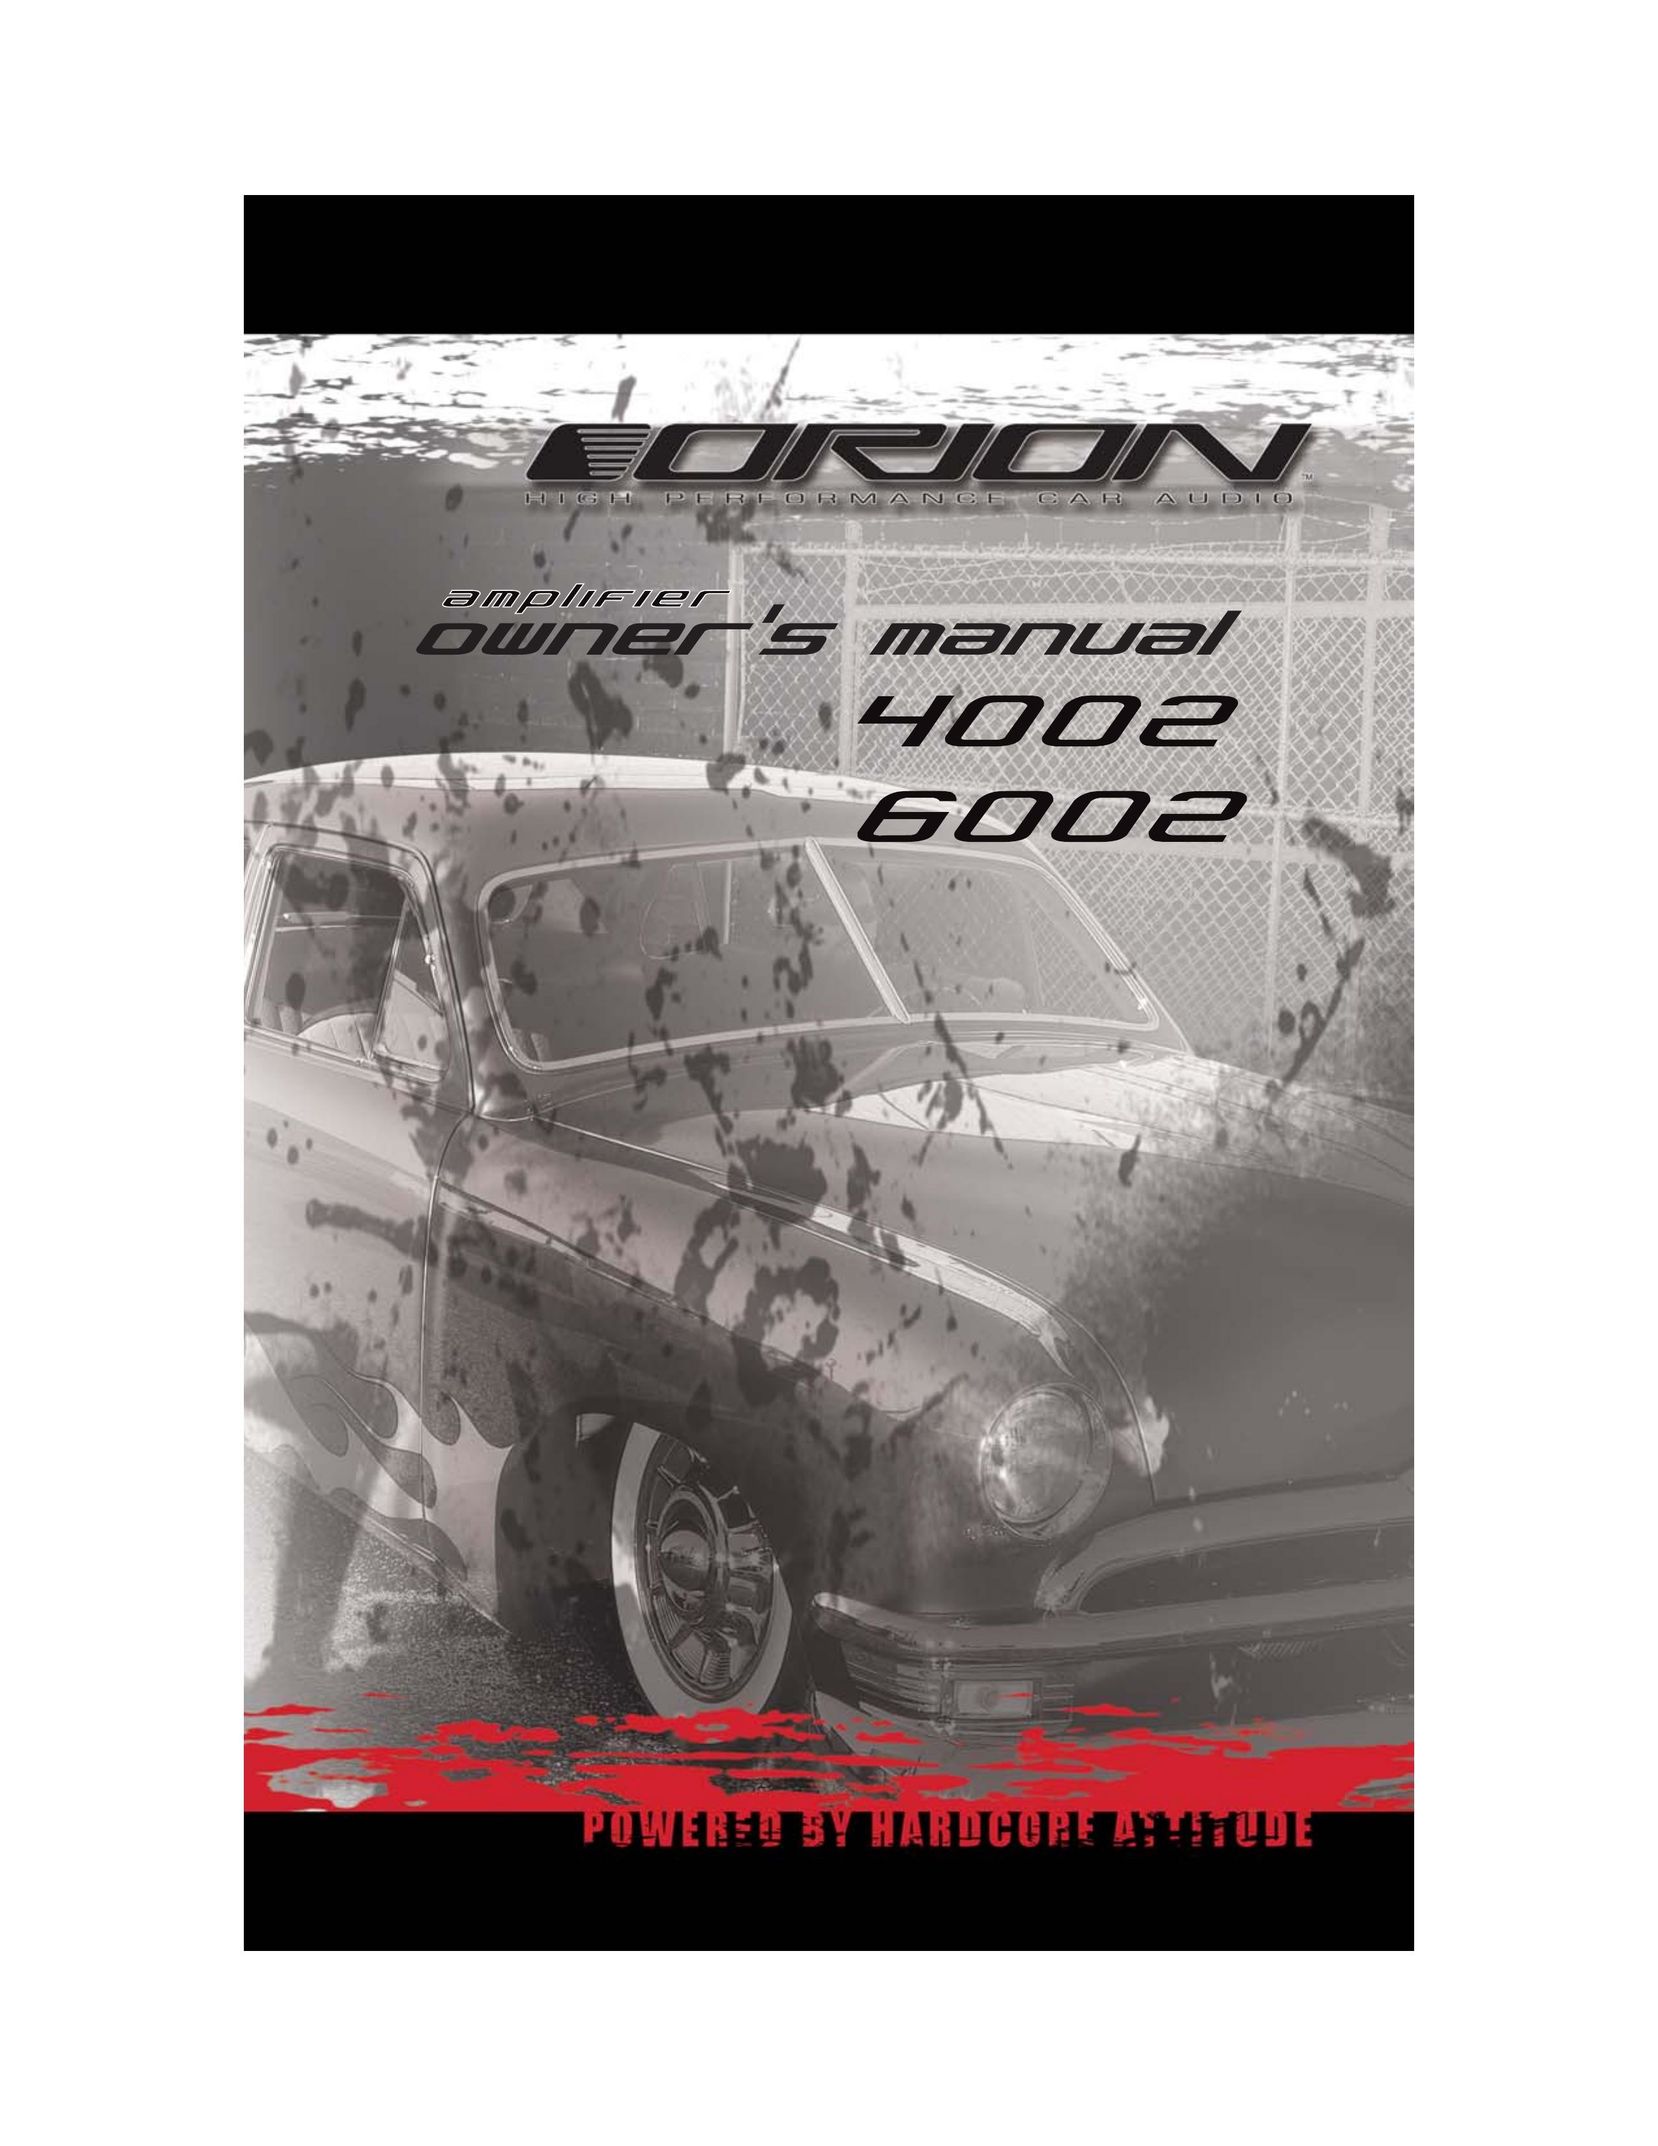 Orion Car Audio 4002 Stereo Amplifier User Manual